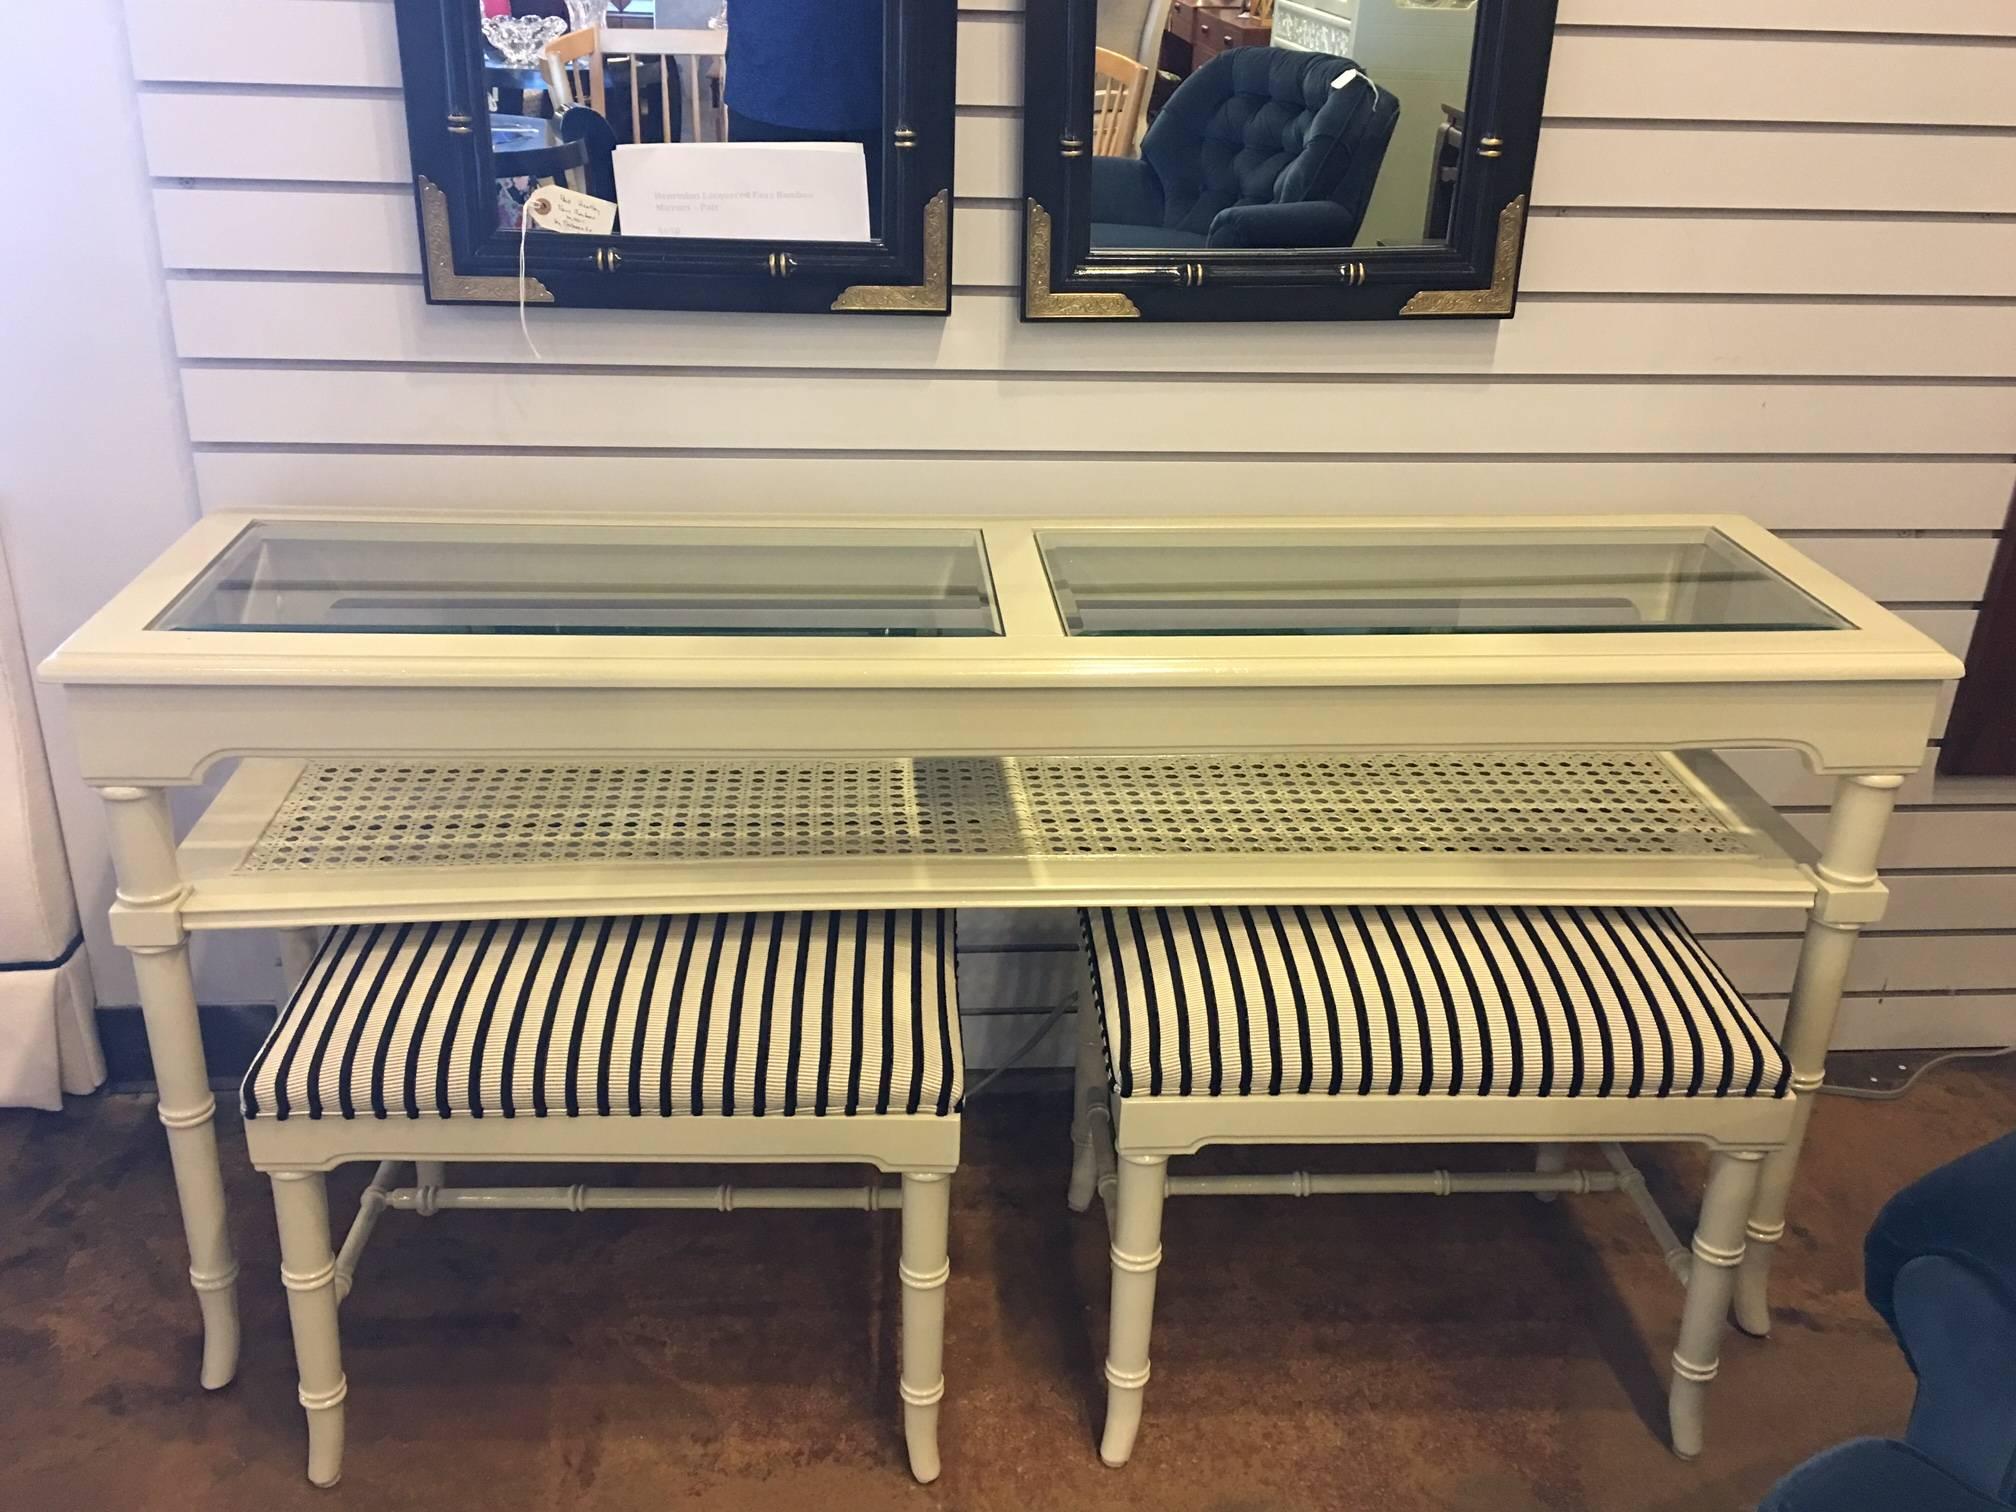 This sweet set has been professionally lacquered in a cream off-white. Two beveled panels on the top of the console, a caned shelf, and two stools or benches that neatly slide under the console or come out for use as seats, side tables, or